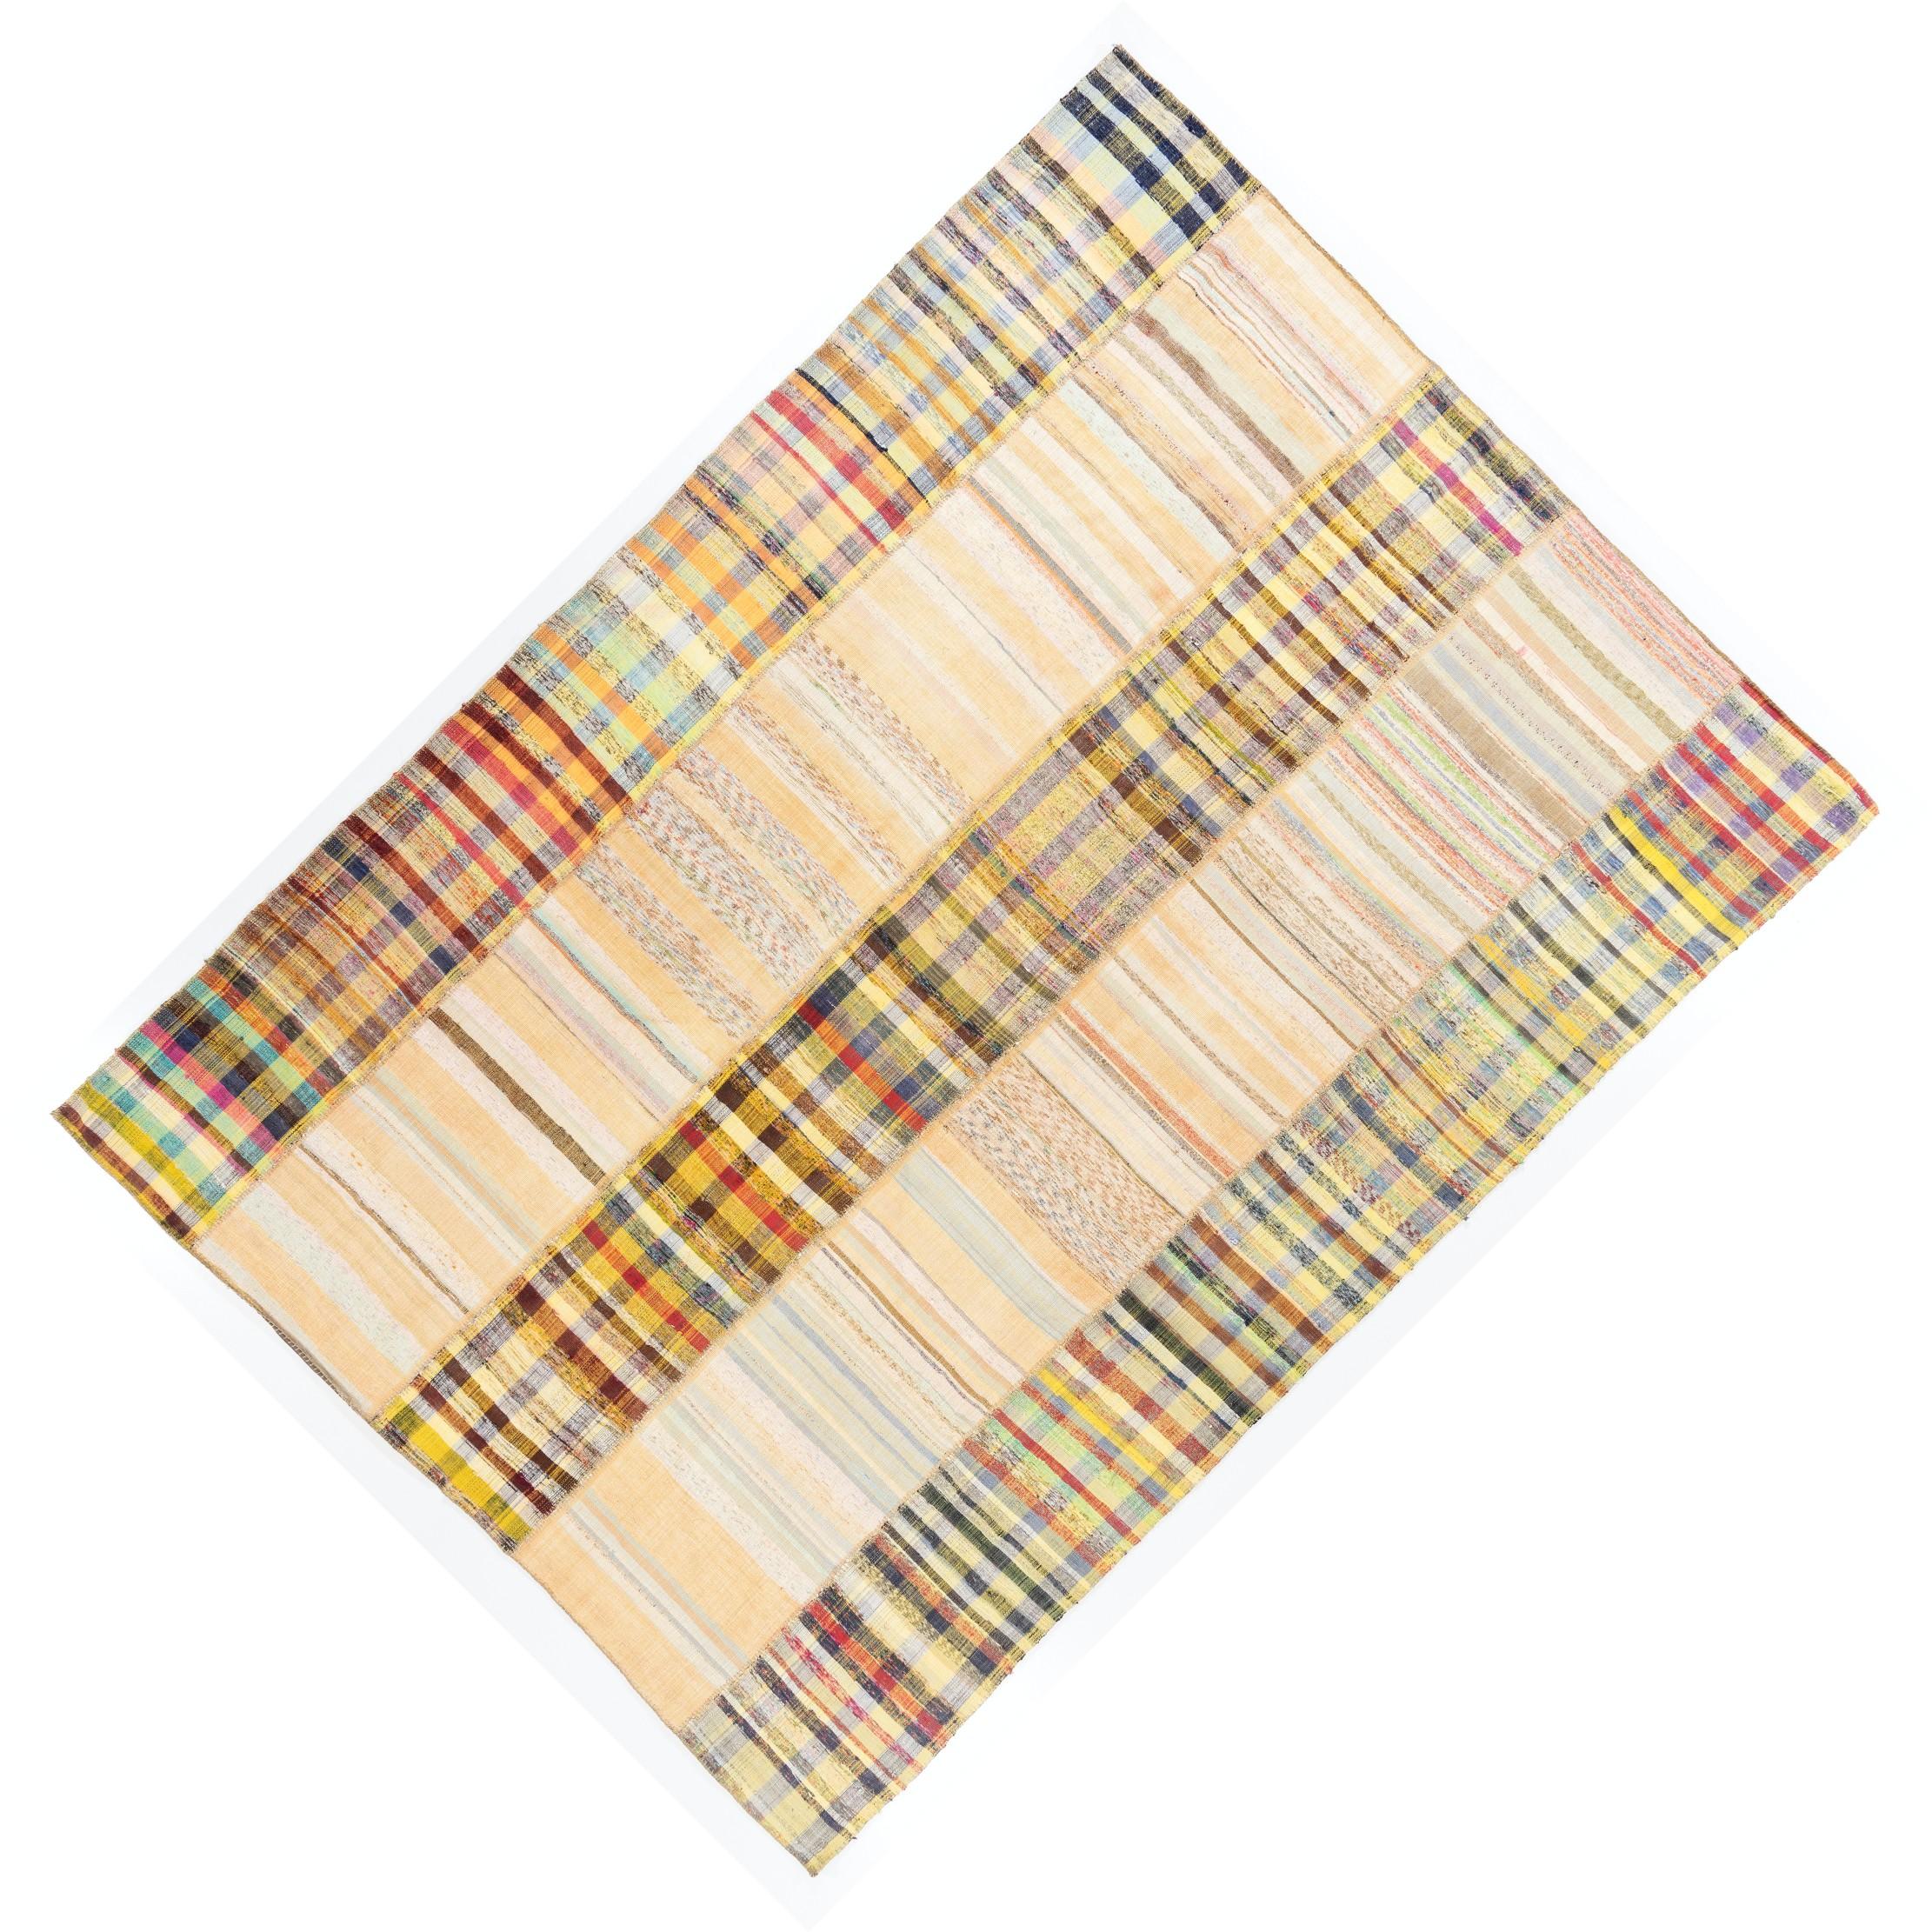 10x13.7 Ft Cotton Mid-Century Anatolian Kilim Hand-Woven Vintage Striped Rug For Sale 2